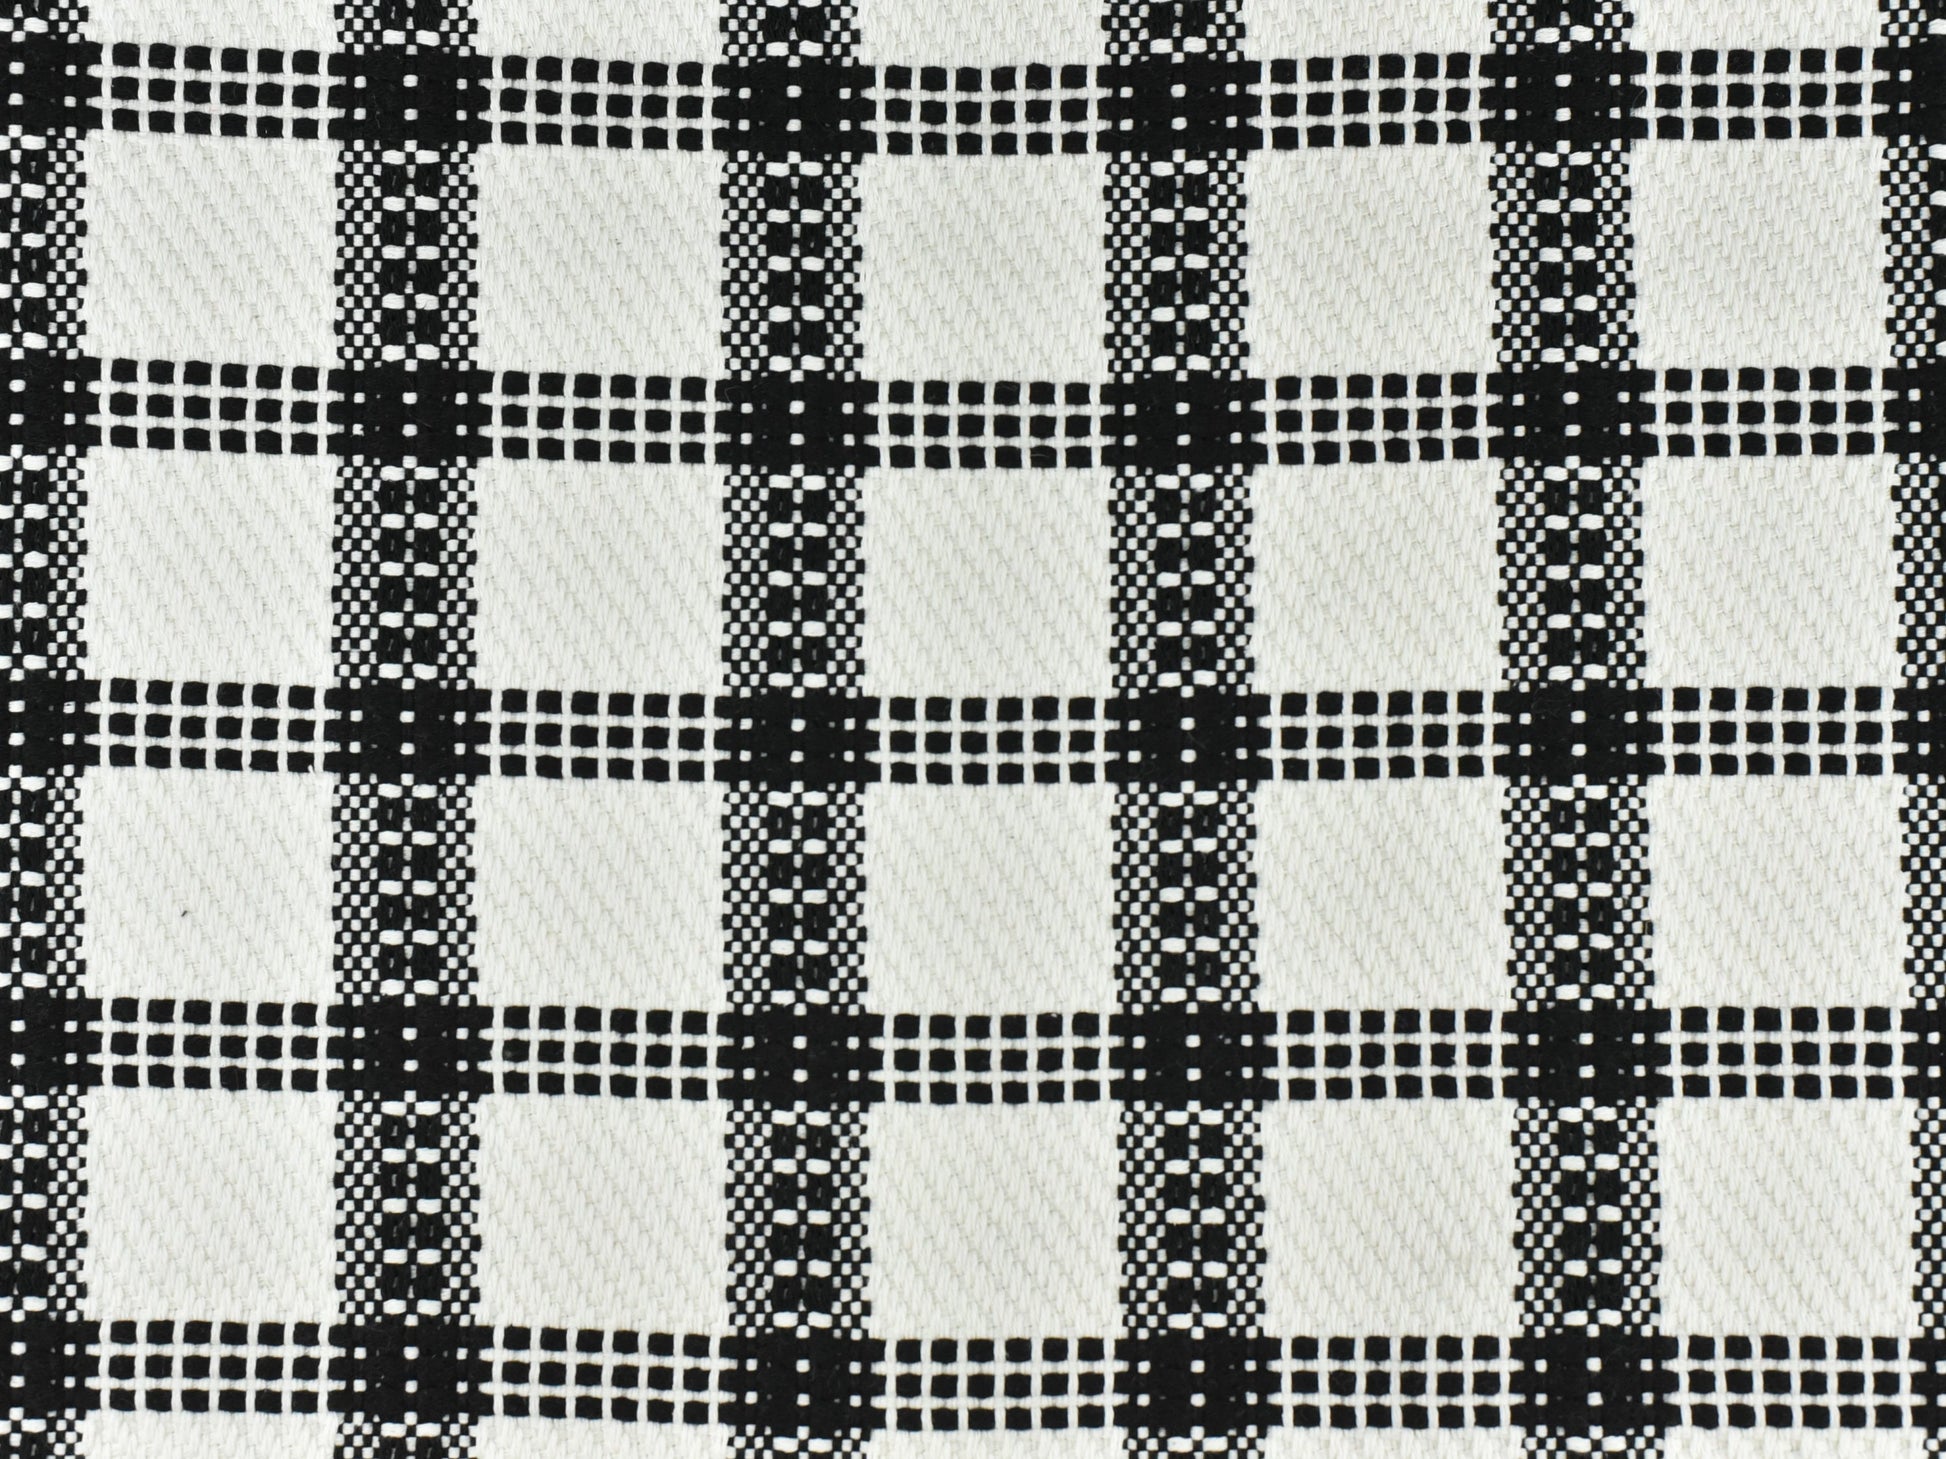 Extra Heavy Weight Cotton Blend Check Pattern Upholstery Fabric|Rustic Farmhouse Decor Fabric|Gingham Cottage Fabric|57'W/900GSM Black White